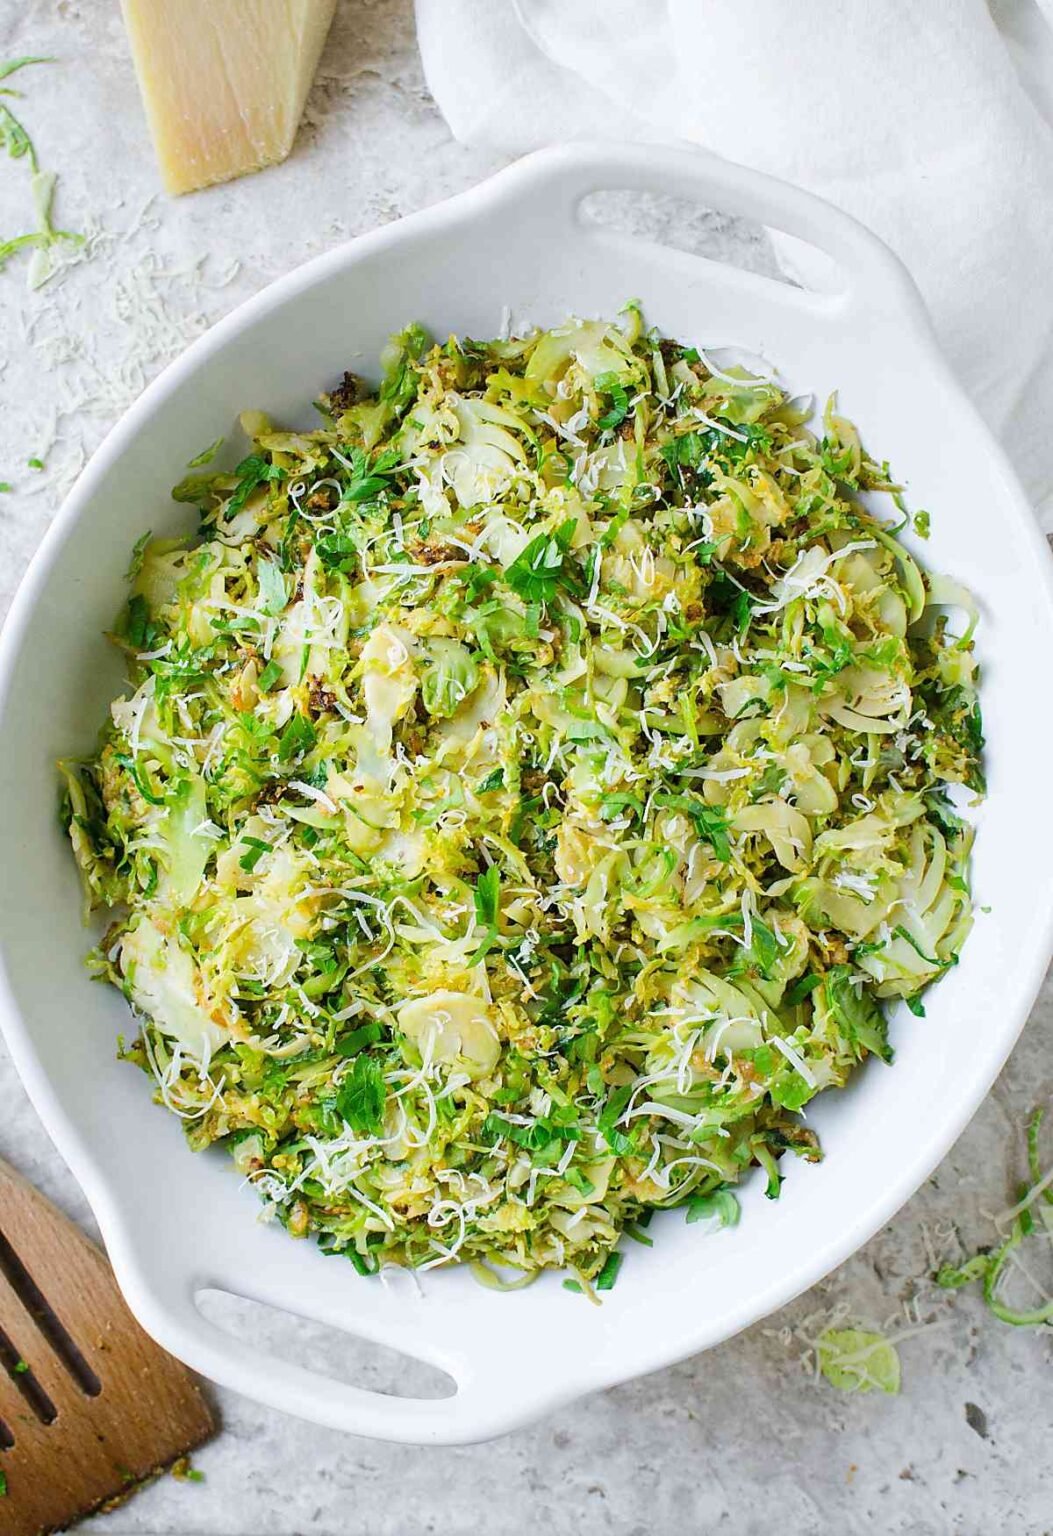 10 Min Shredded & Sauteed Brussels Sprouts With Garlic & Parmesan